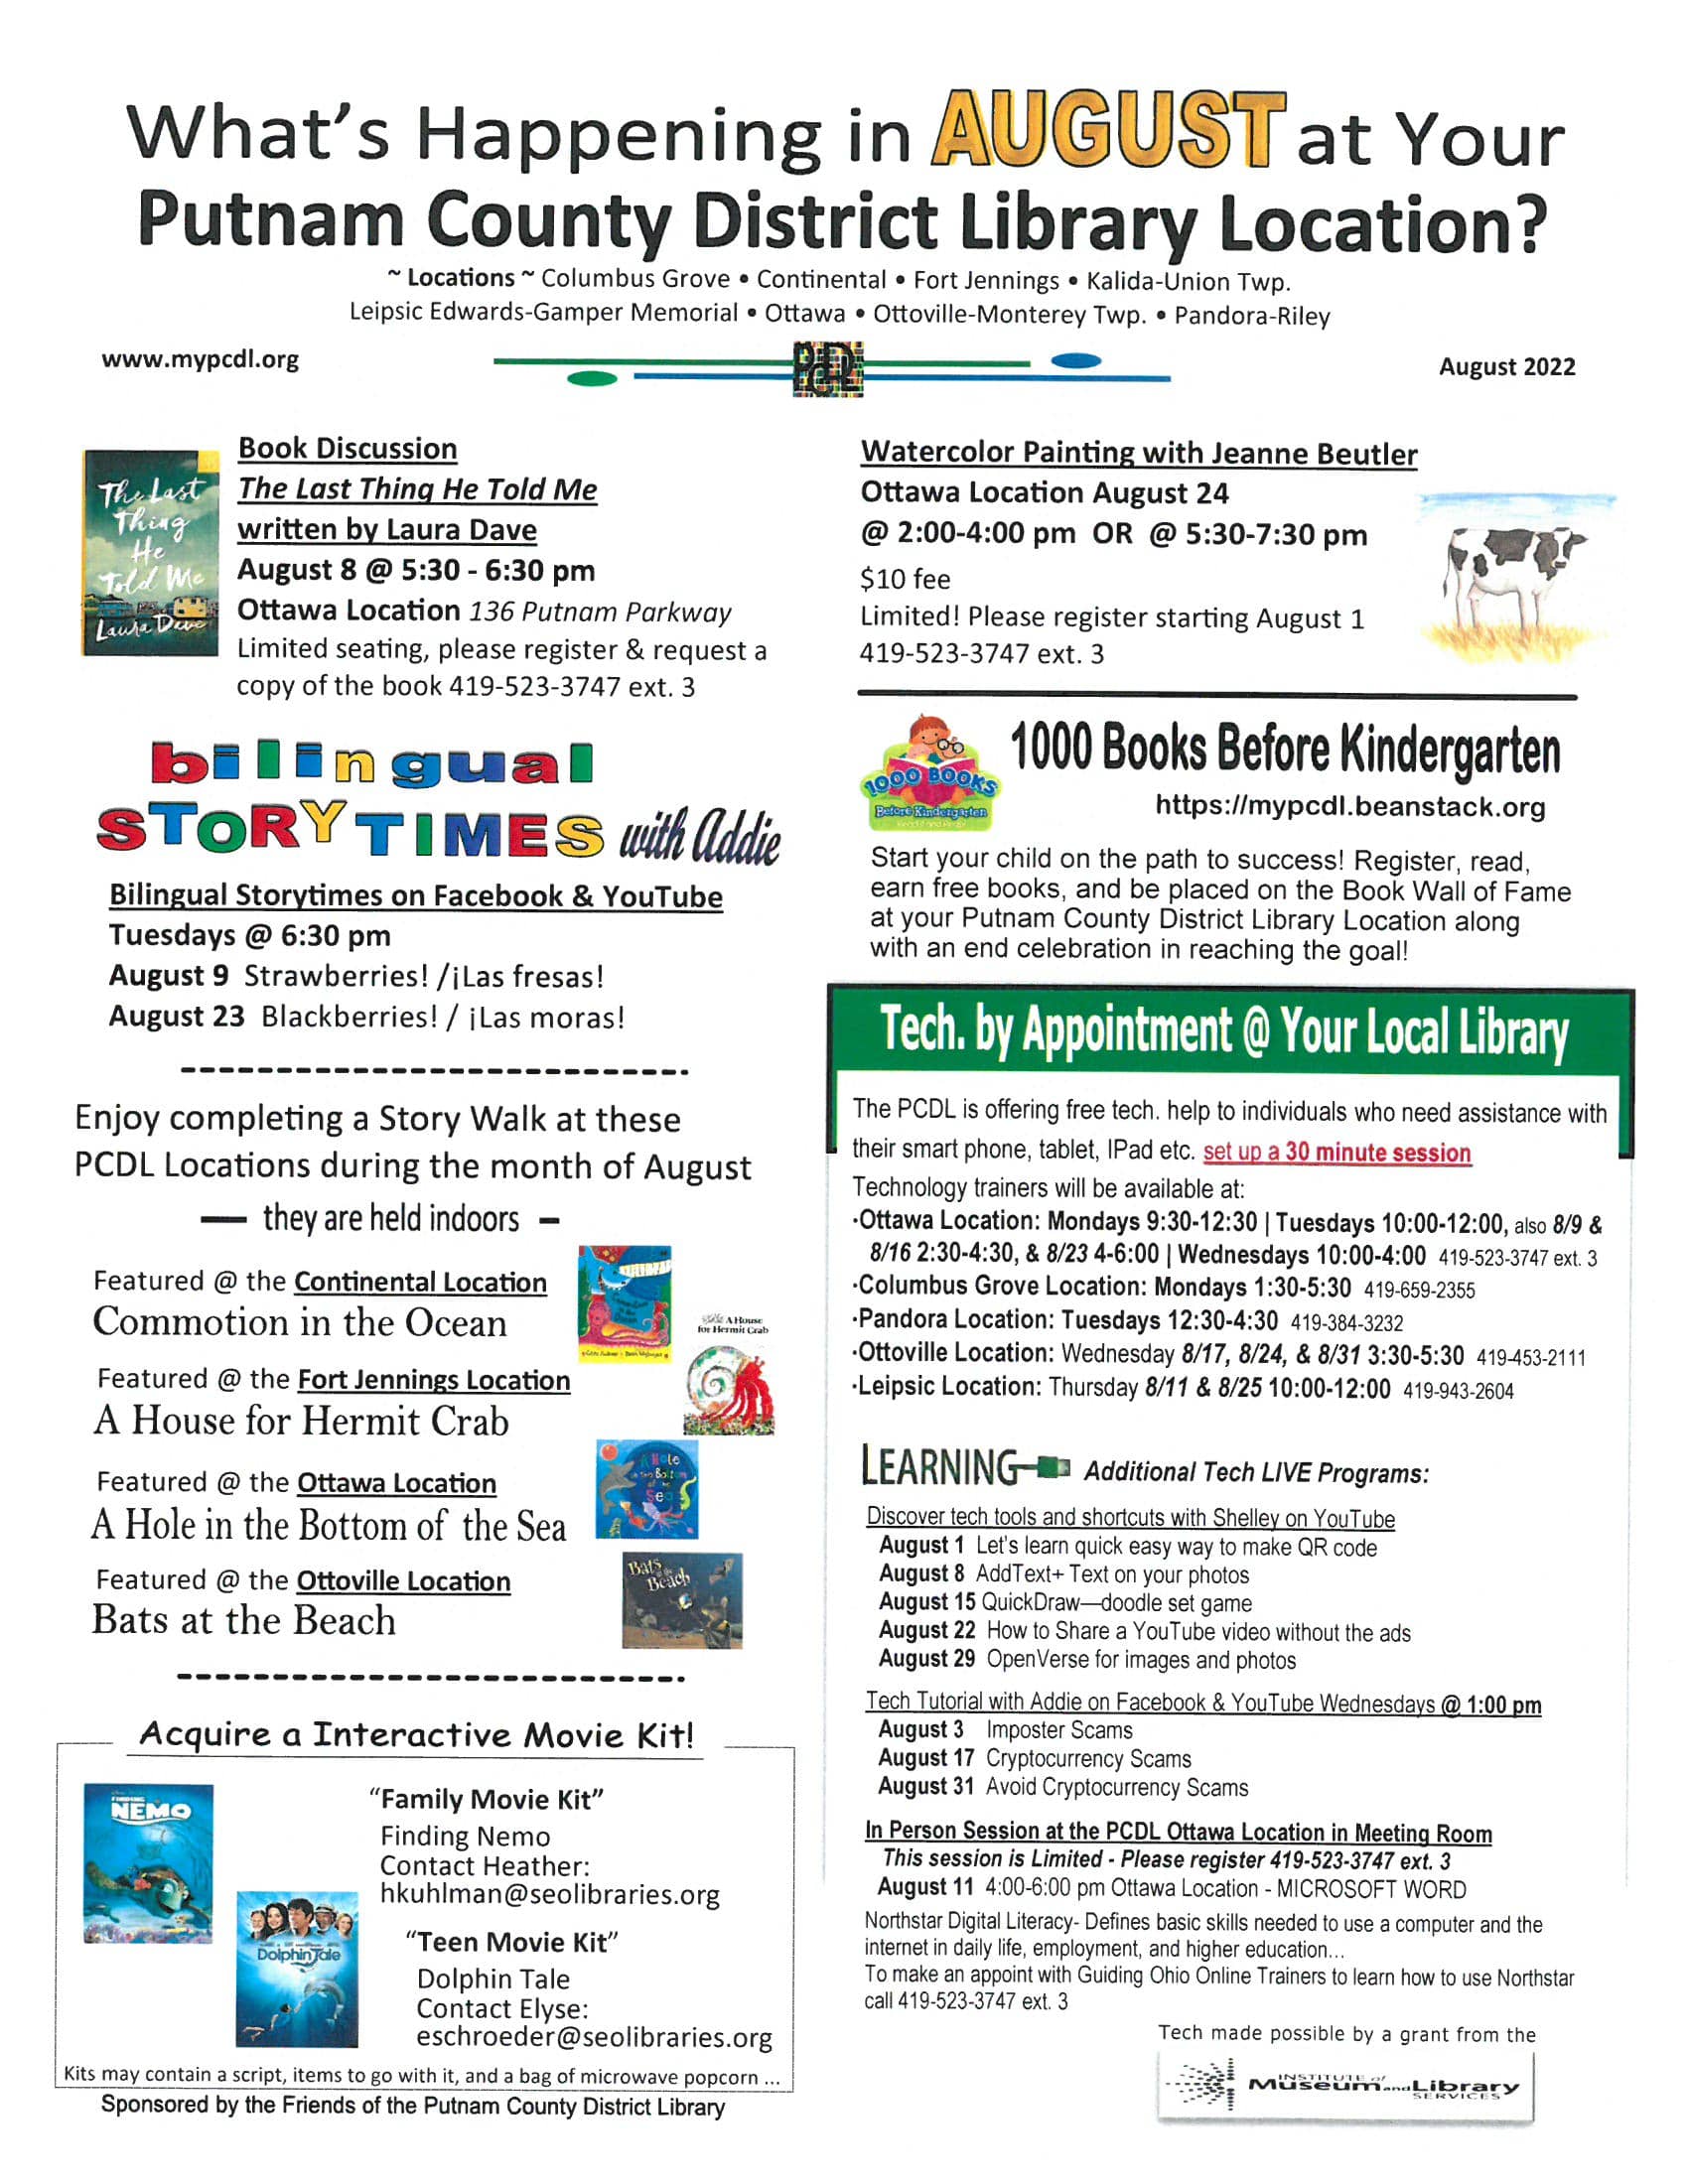 What's happing in August at your Putnam County District Library Location flyer